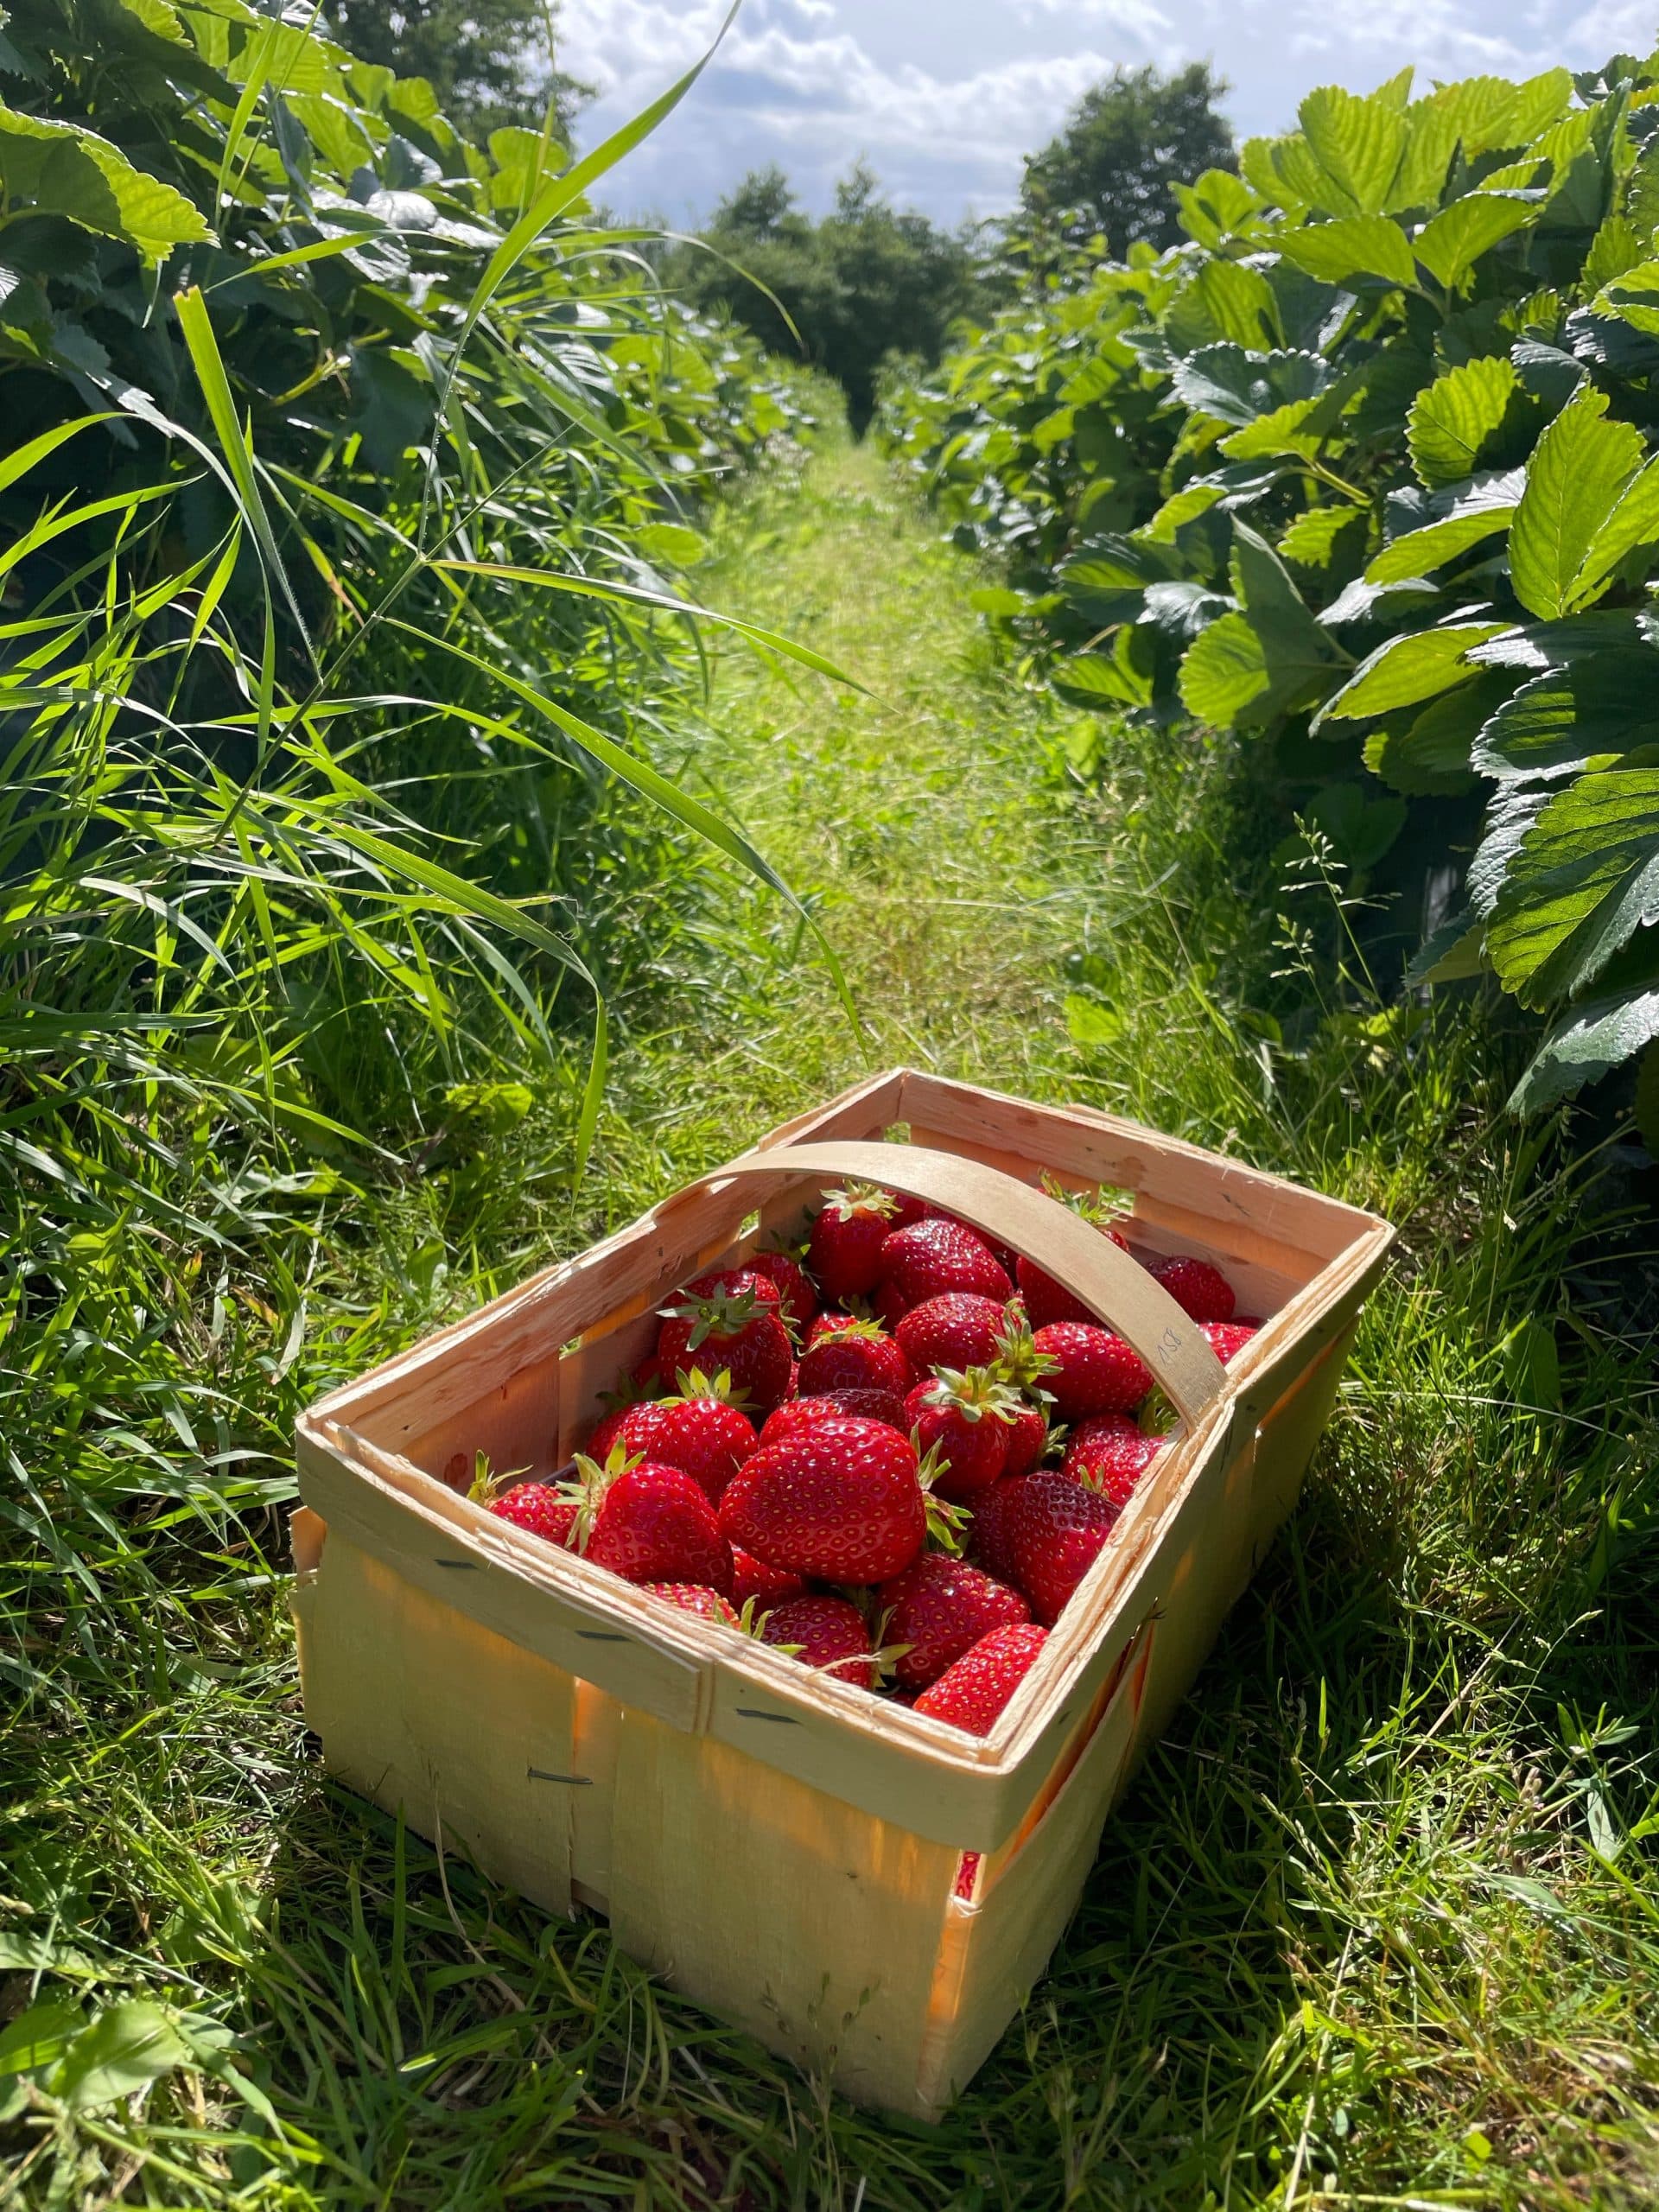 A wooden basket filled with strawberries on the ground between rows of strawberry plants